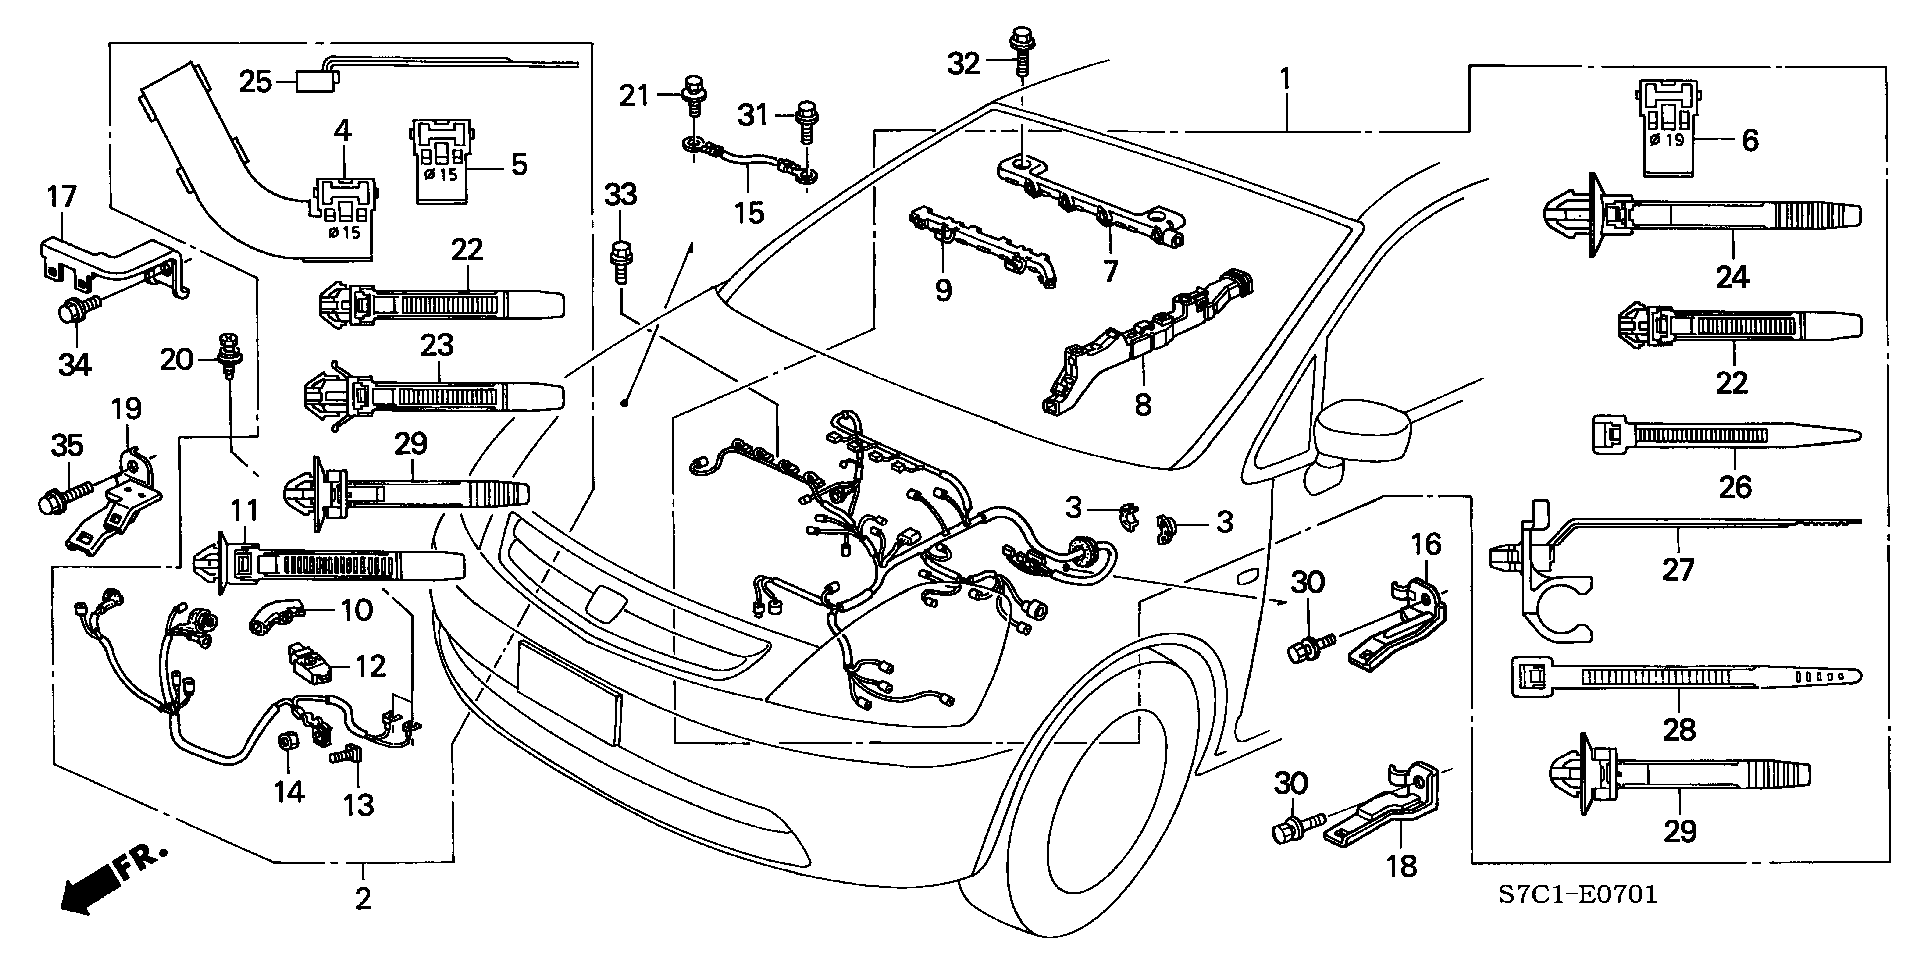 ENGINE WIRE HARNESS (2.0L)